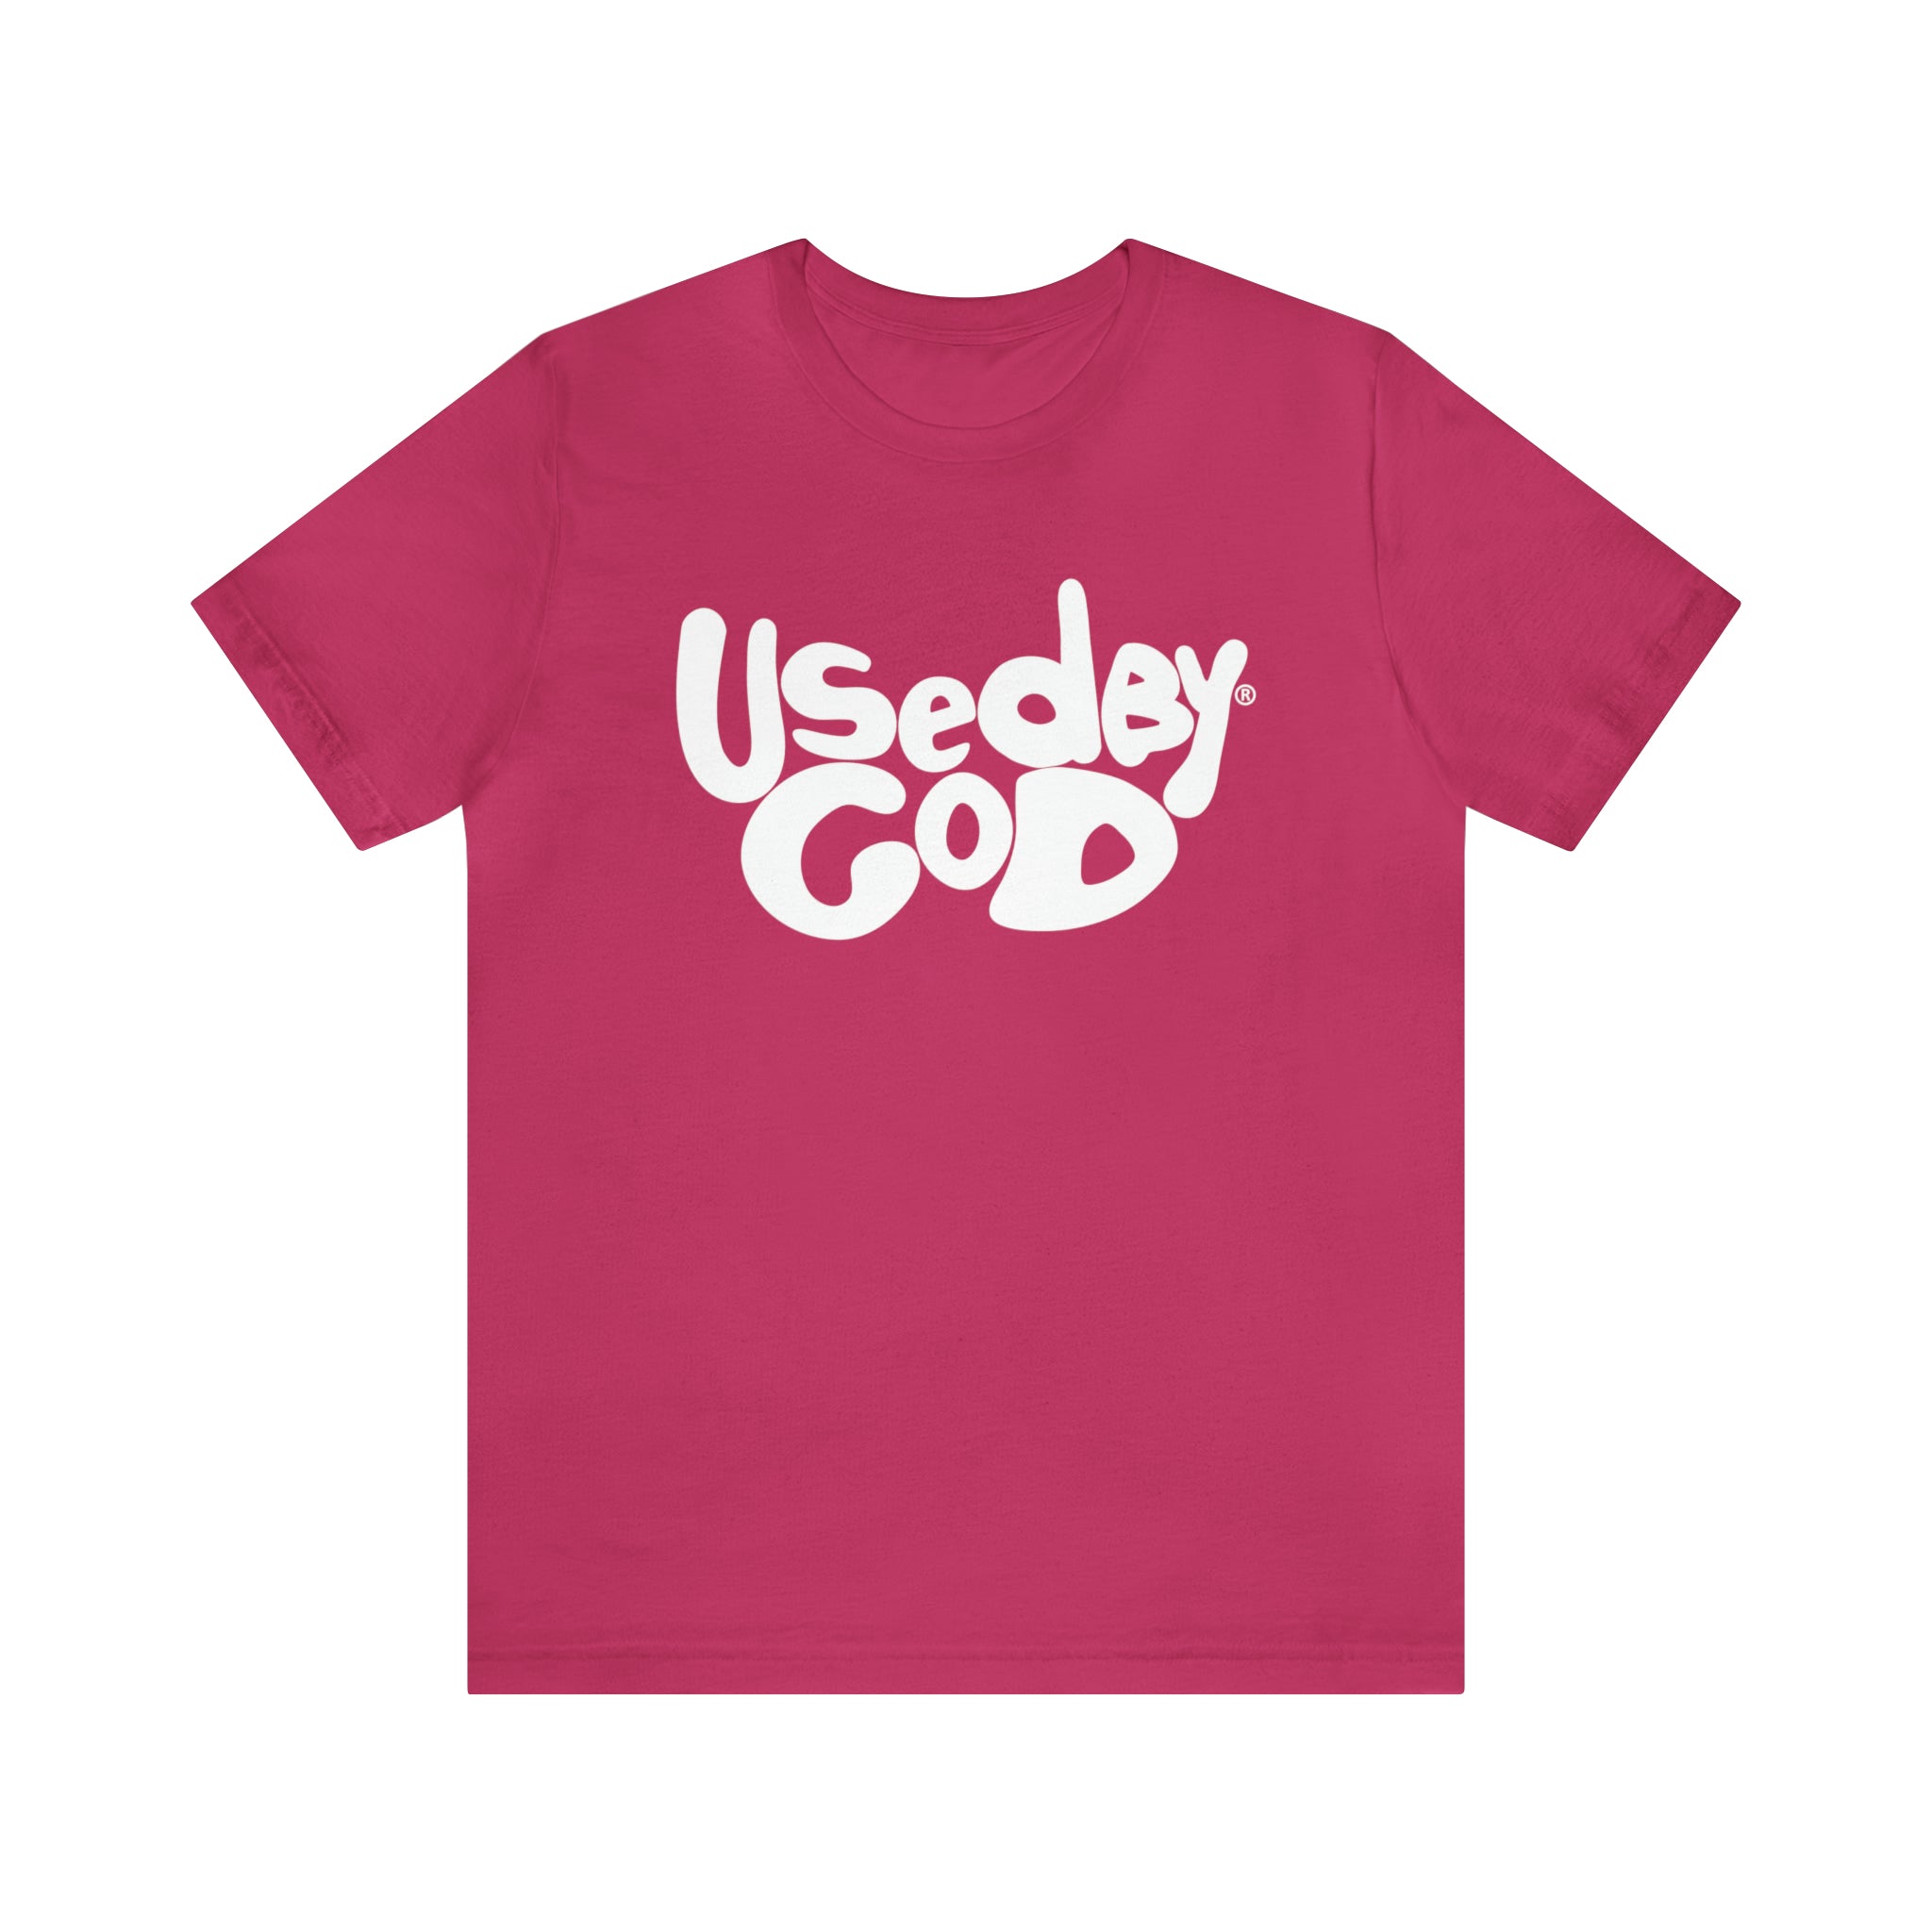 Used By God Retro Original Tee, Used By God, Used By God Clothing, Christian Apparel, Christian T-Shirts, Christian Shirts, christian t shirts for women, Men's Christian T-Shirt, Christian Clothing, God Shirts, christian clothing t shirts, Christian Sweatshirts, womens christian t shirts, t-shirts about jesus, God Clothing, Jesus Hoodie, Jesus Clothes, God Is Dope, Art Of Homage, Red Letter Clothing, Elevated Faith, Beacon Threads, God The Father Apparel